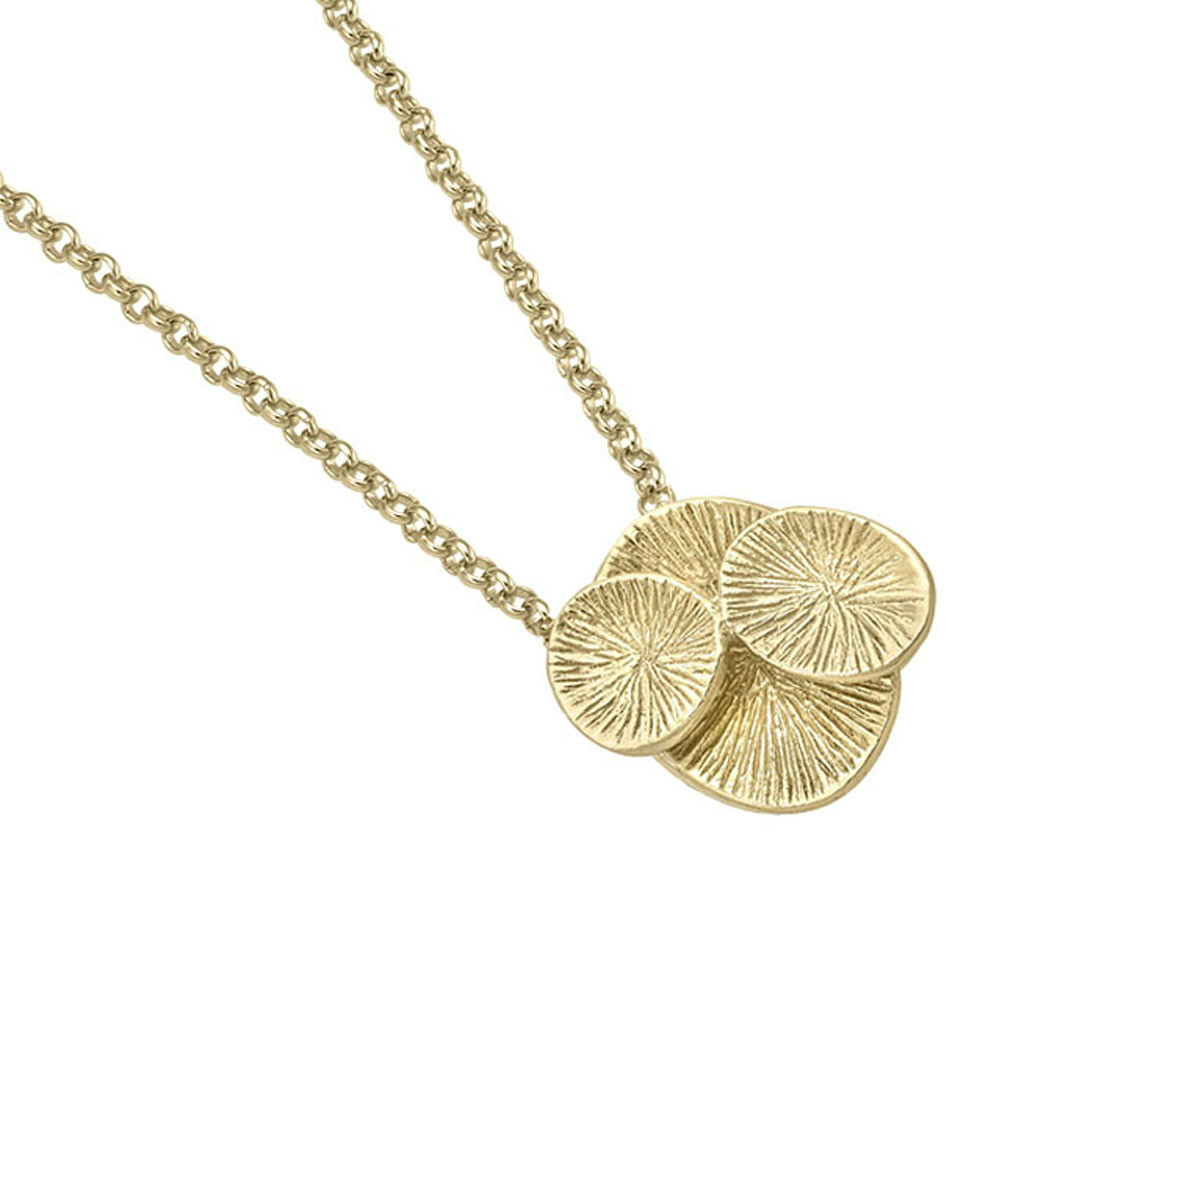 LILY Pendant in Silver. 18k Gold Vermeil